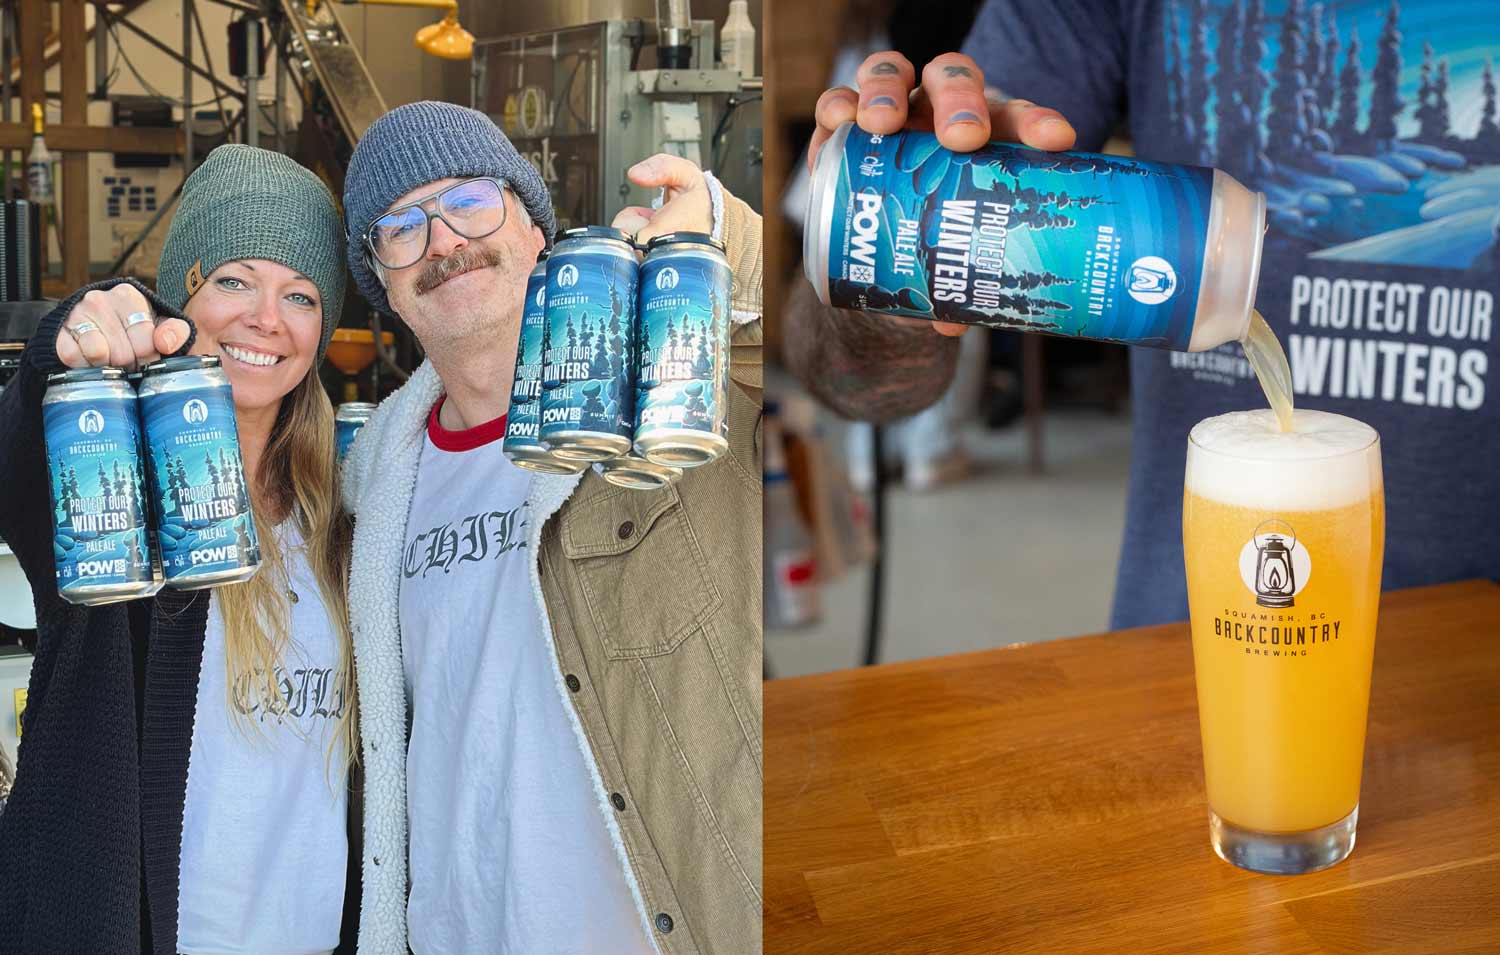 Backcountry Brewing - Protect Our Winters Fundraiser, images of people holding cans and pouring a can of the beer into a glass.